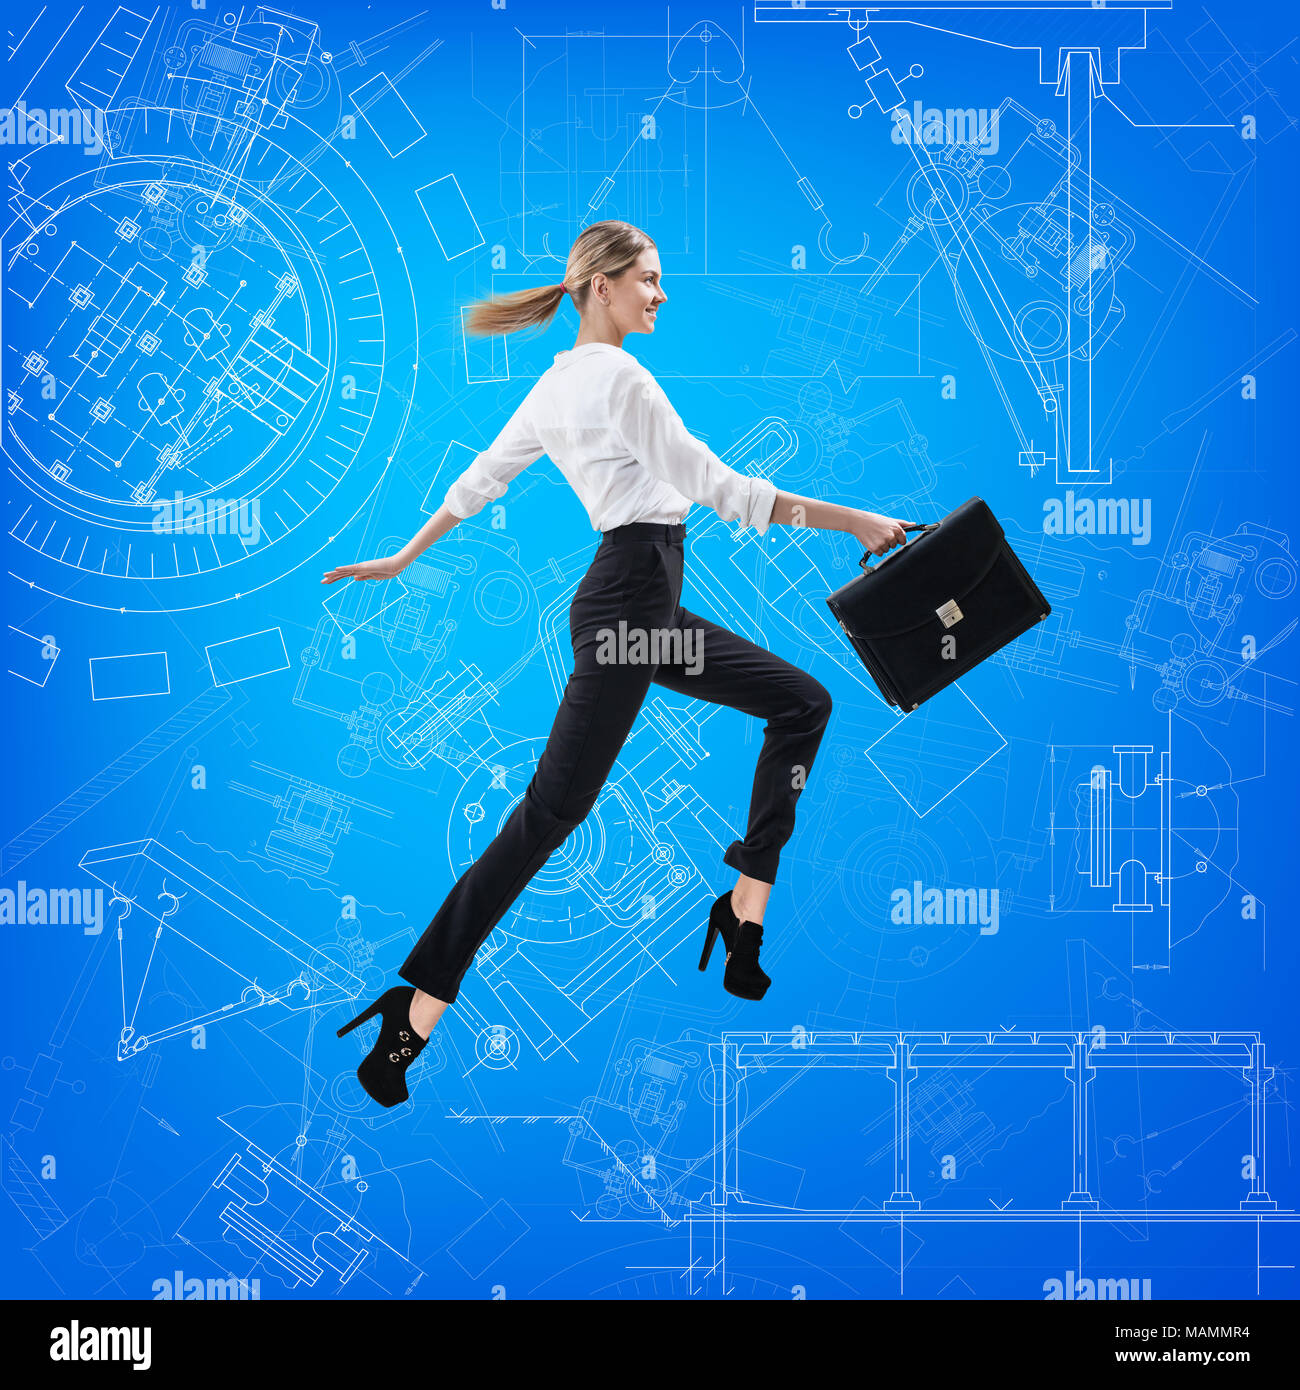 Business woman jumping over blueprint background. Stock Photo